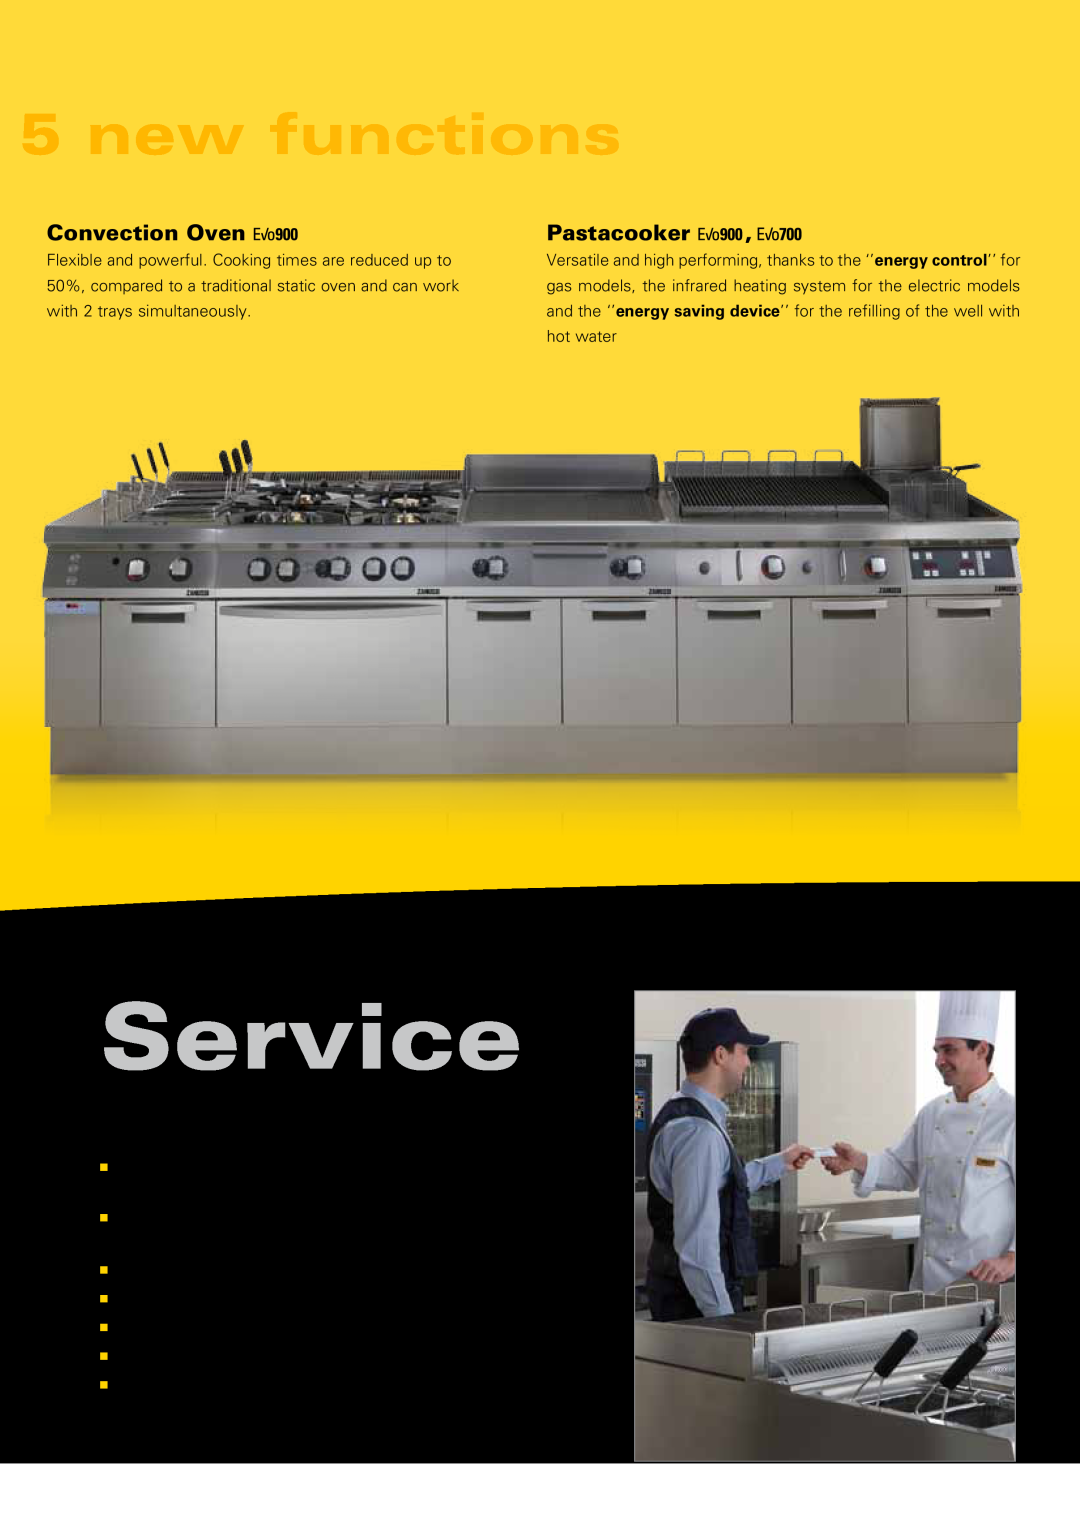 Zanussi EVO700 manual Service, new functions, Convection Oven, Pastacooker 